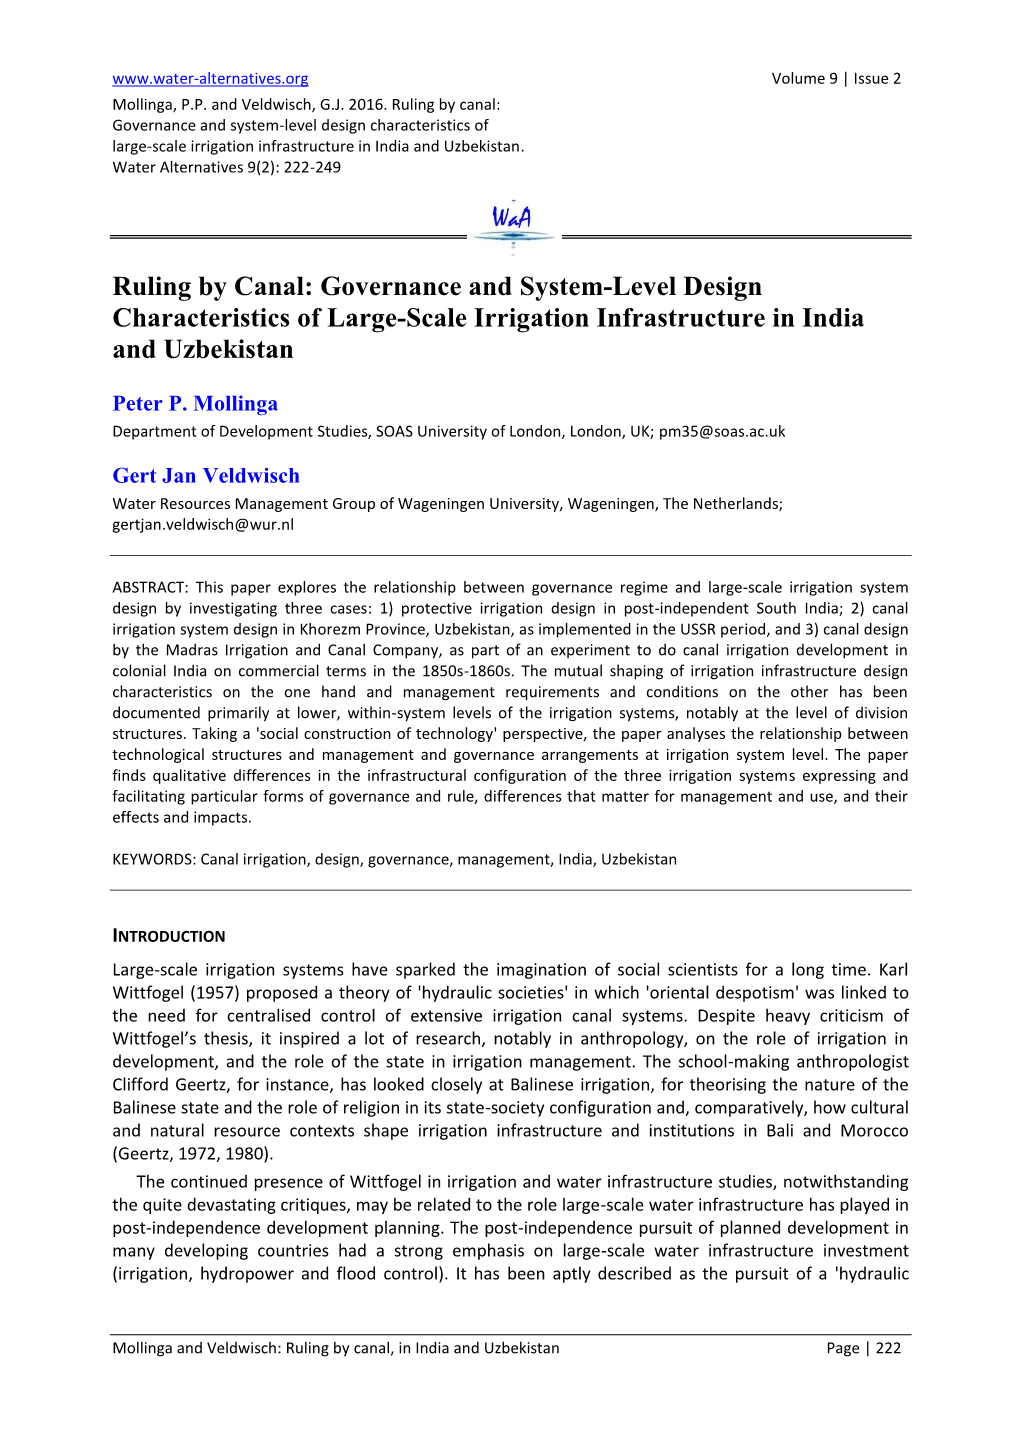 Ruling by Canal: Governance and System-Level Design Characteristics of Large-Scale Irrigation Infrastructure in India and Uzbekistan